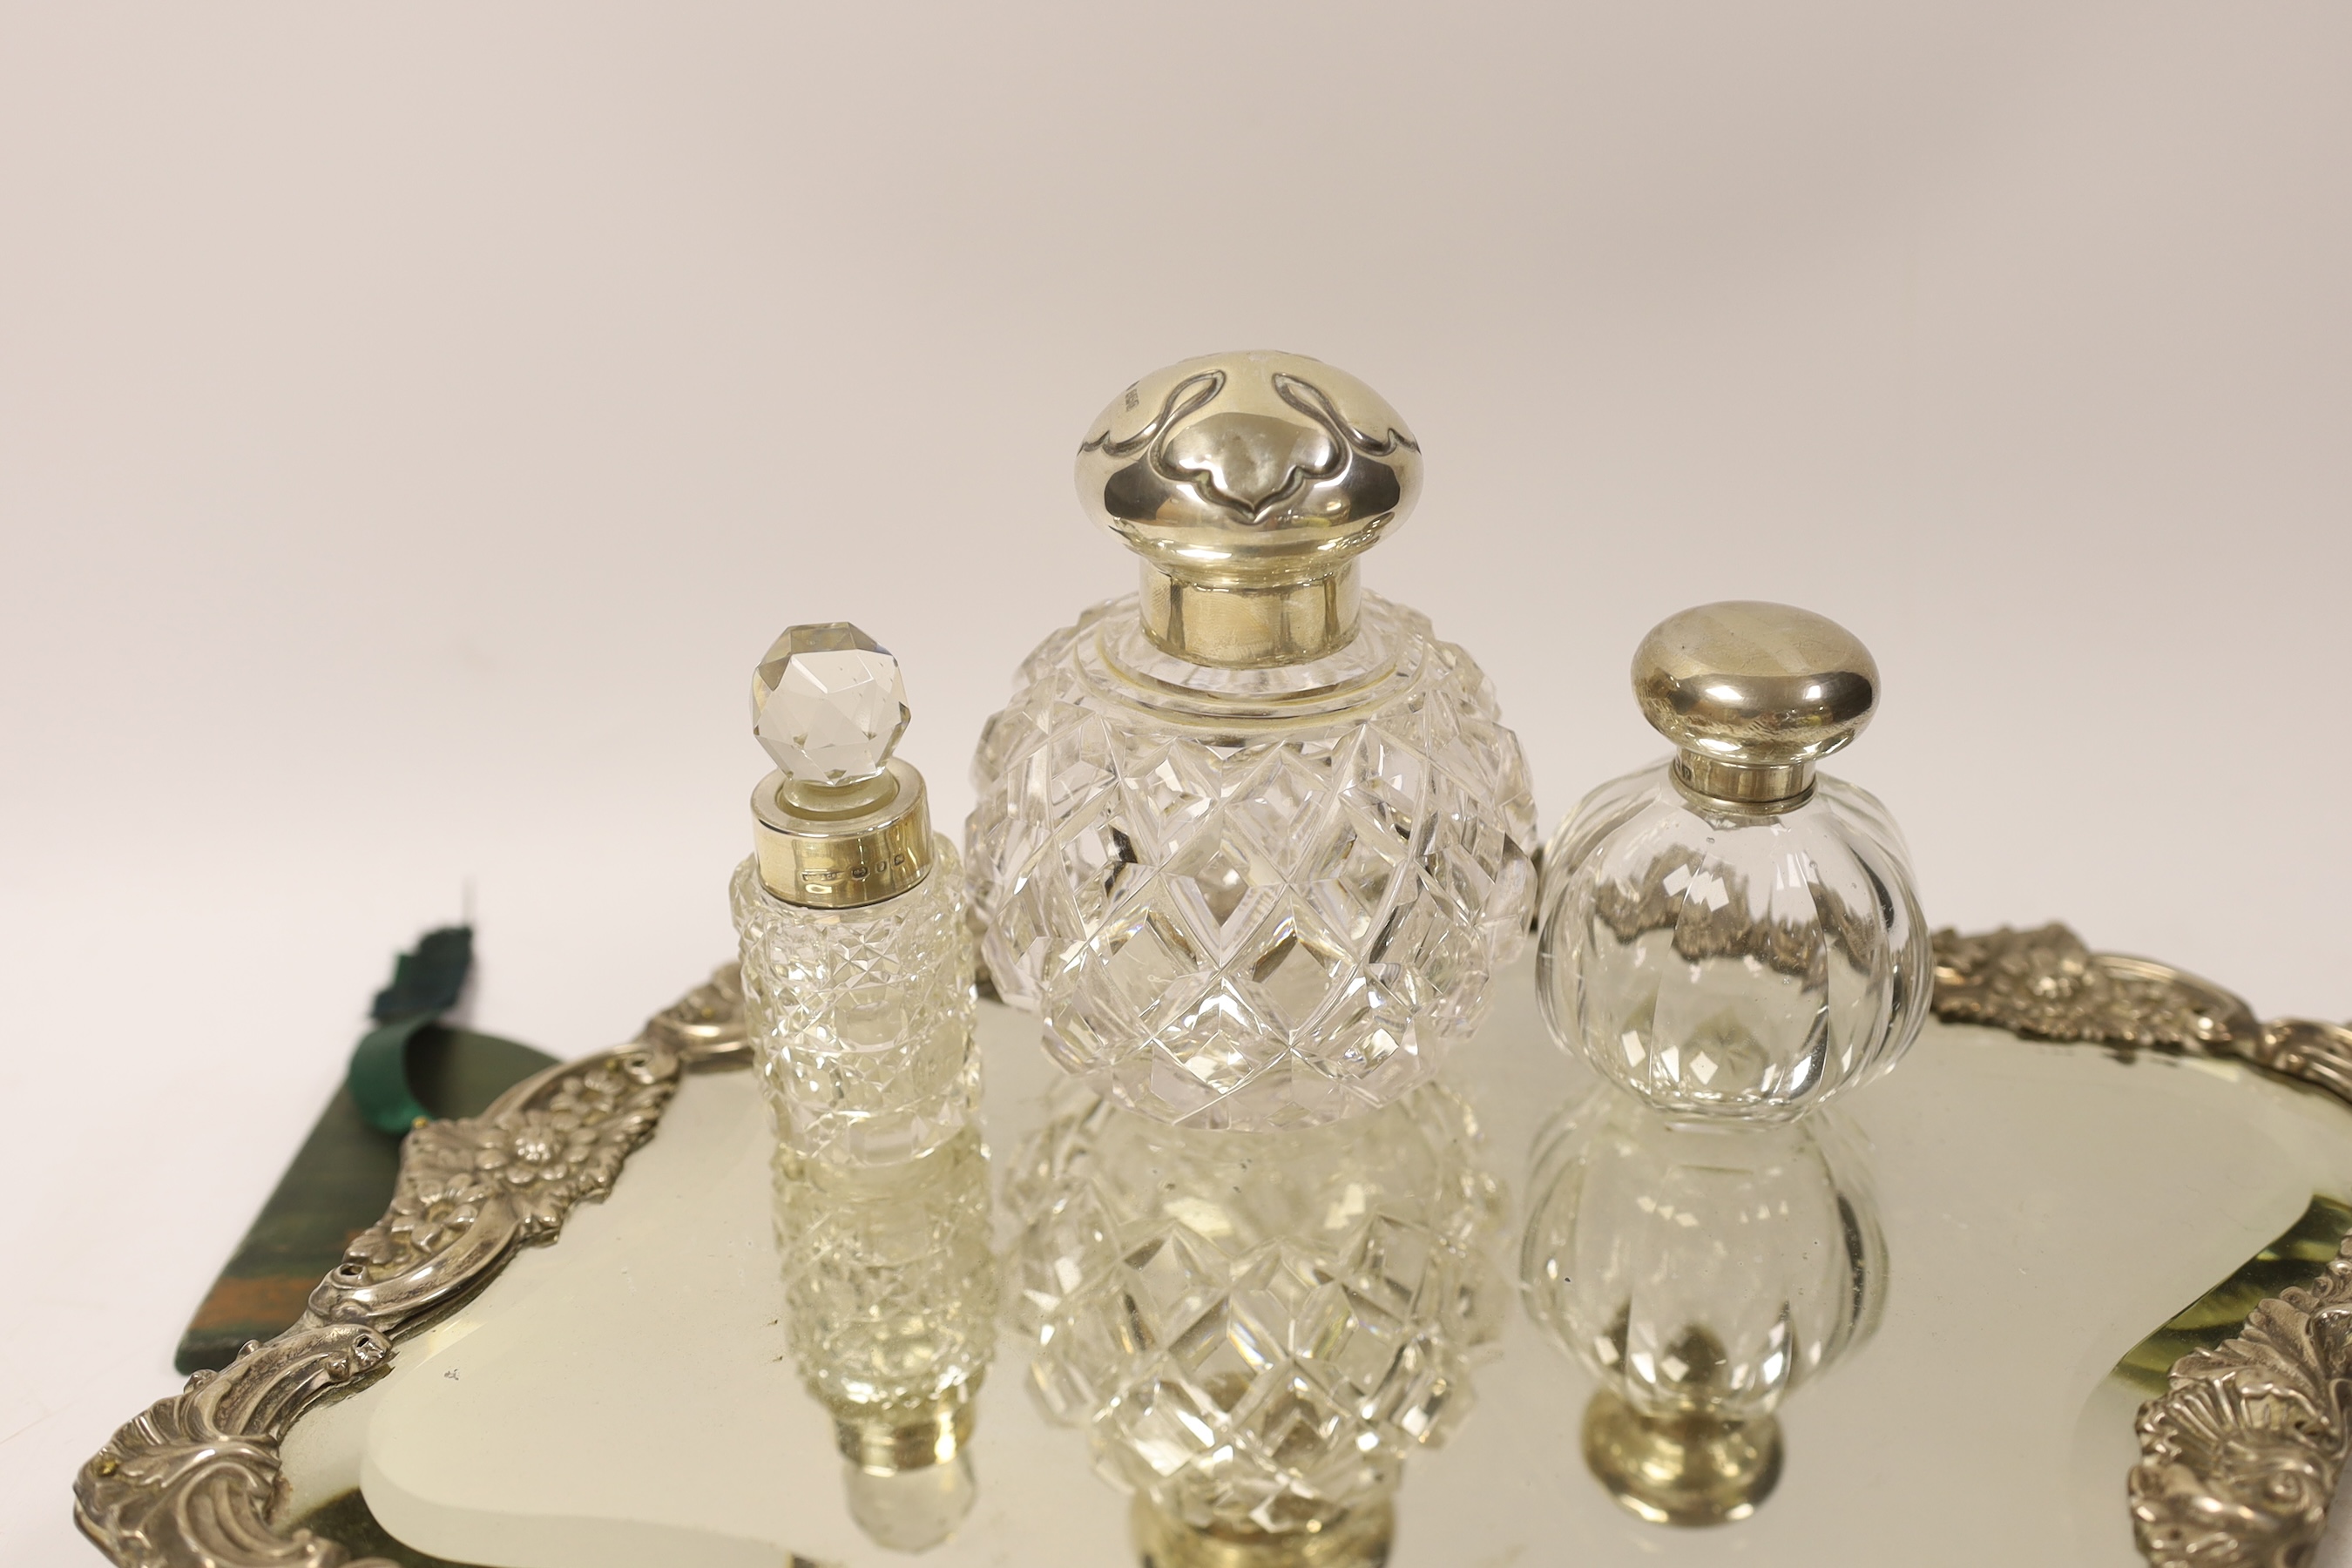 An Edwardian silver mounted easel mirror, Sheffield, 1902 (a.f.), together with three assorted silver mounted glass scent bottles.